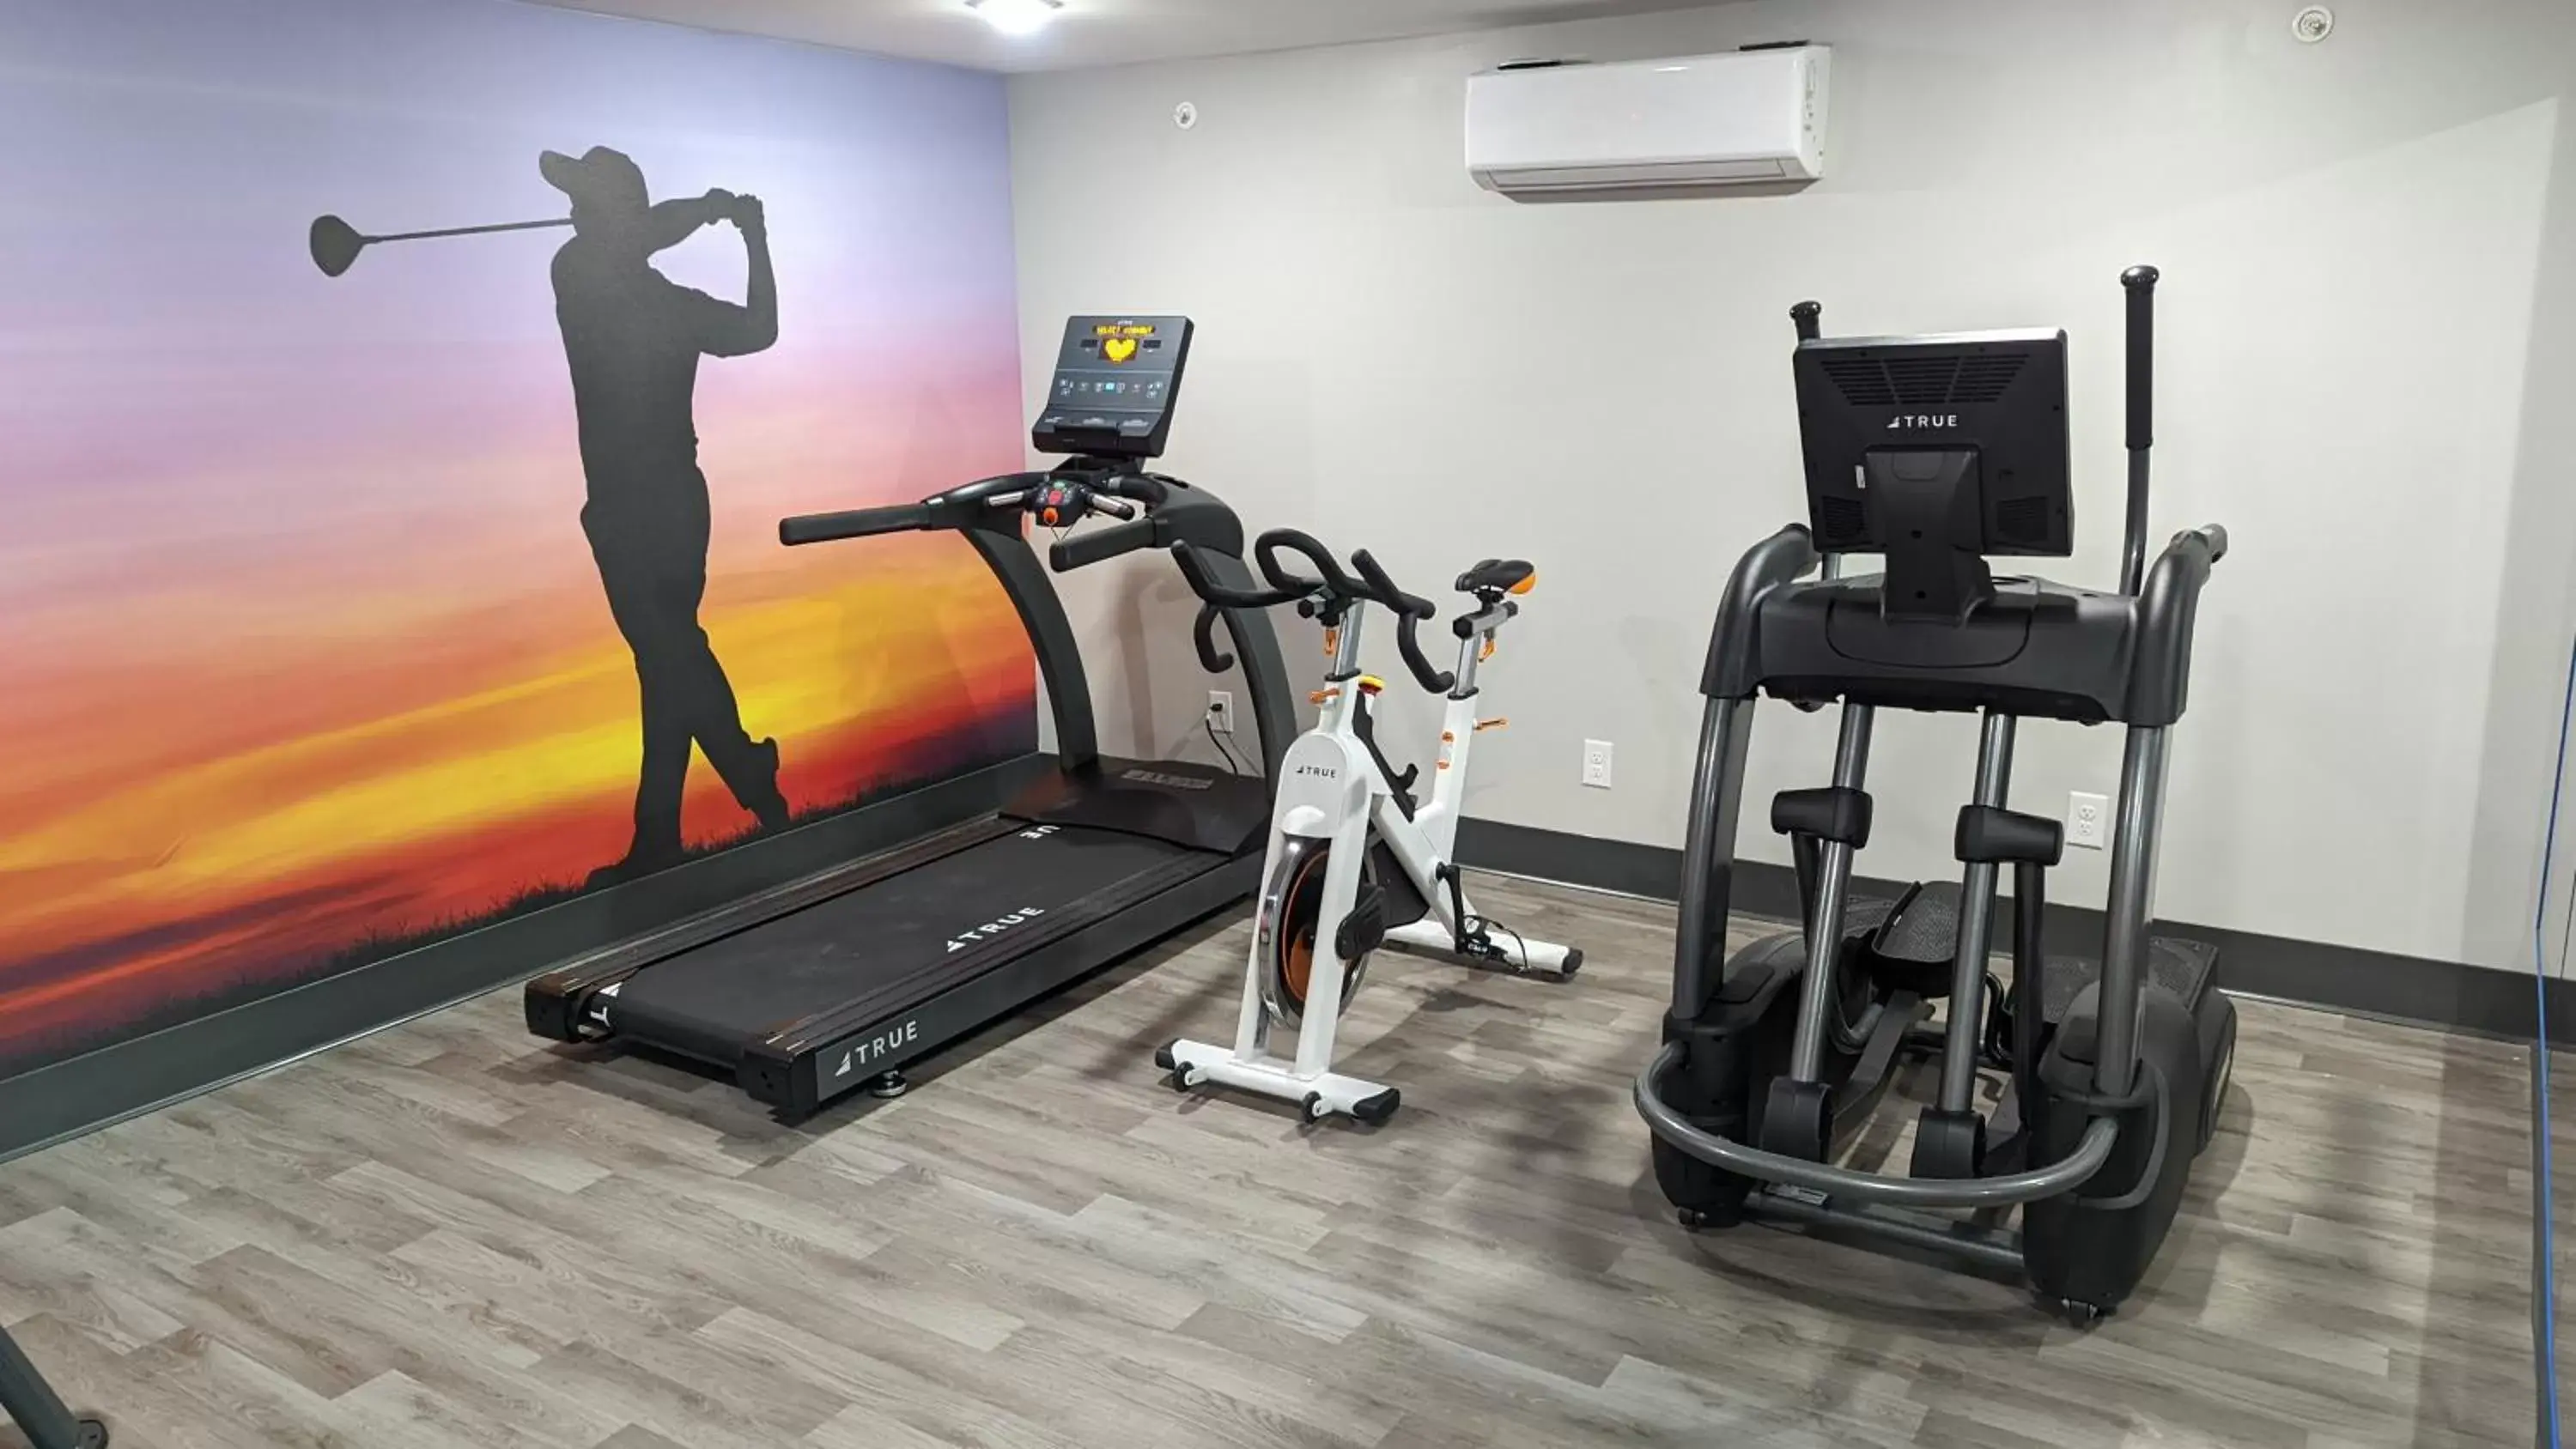 Fitness centre/facilities, Fitness Center/Facilities in Clarion Pointe McDonough